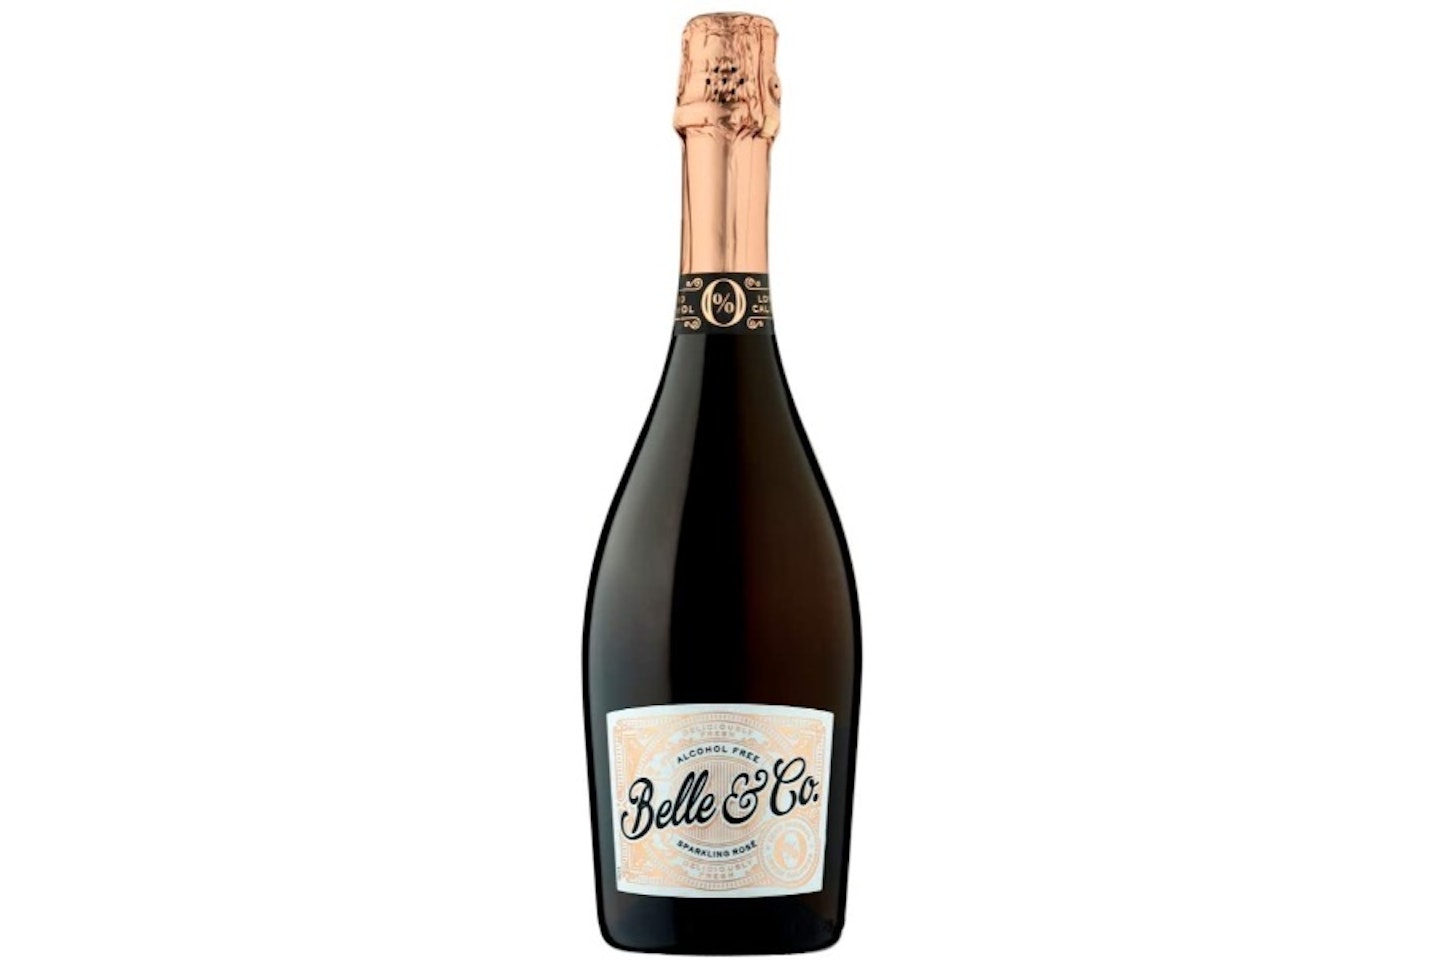 Belle & Co Sparkling Rose Alcohol Free Wine, Non-Alcoholic